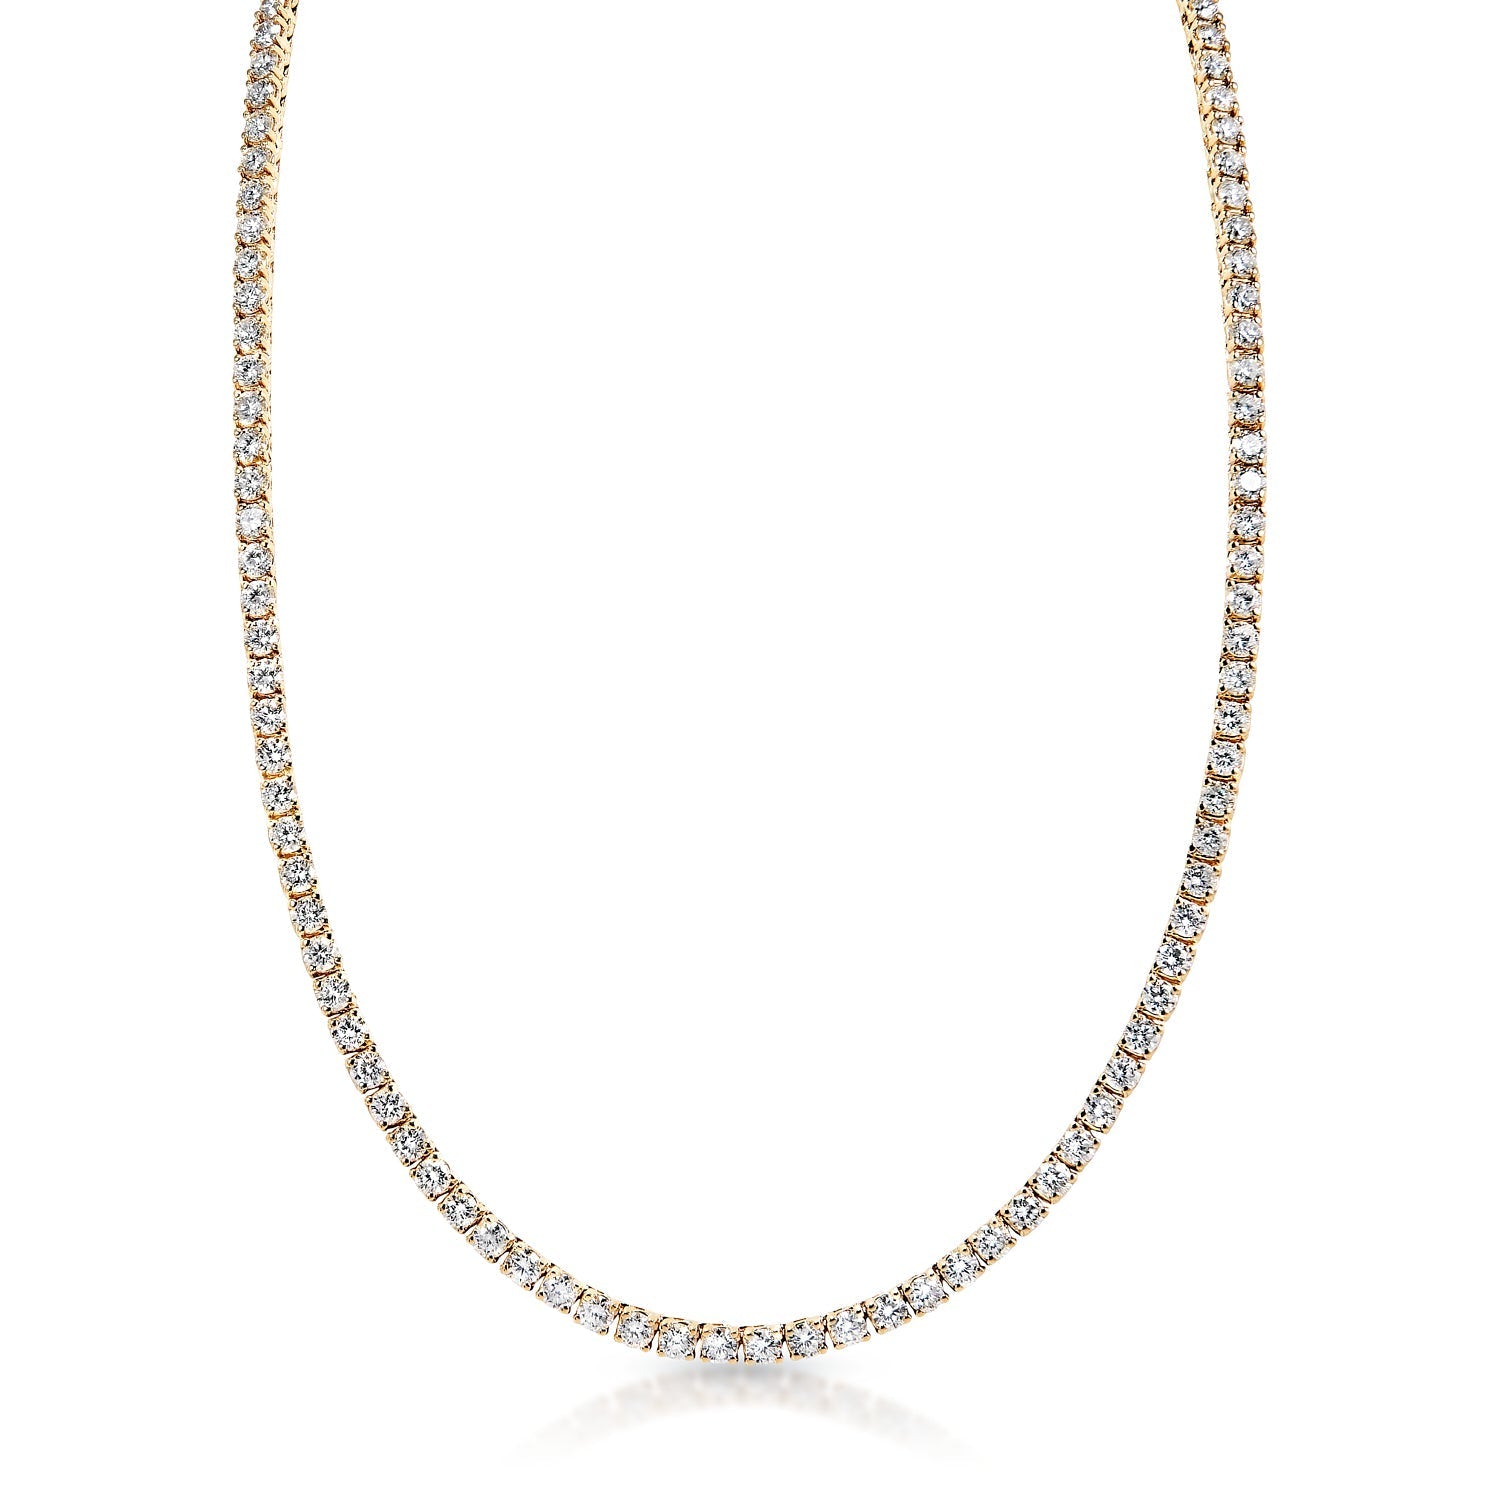 Alexis 19 Carat Round Brilliant Diamond Tennis Necklace in 14k Yellow Gold Front View